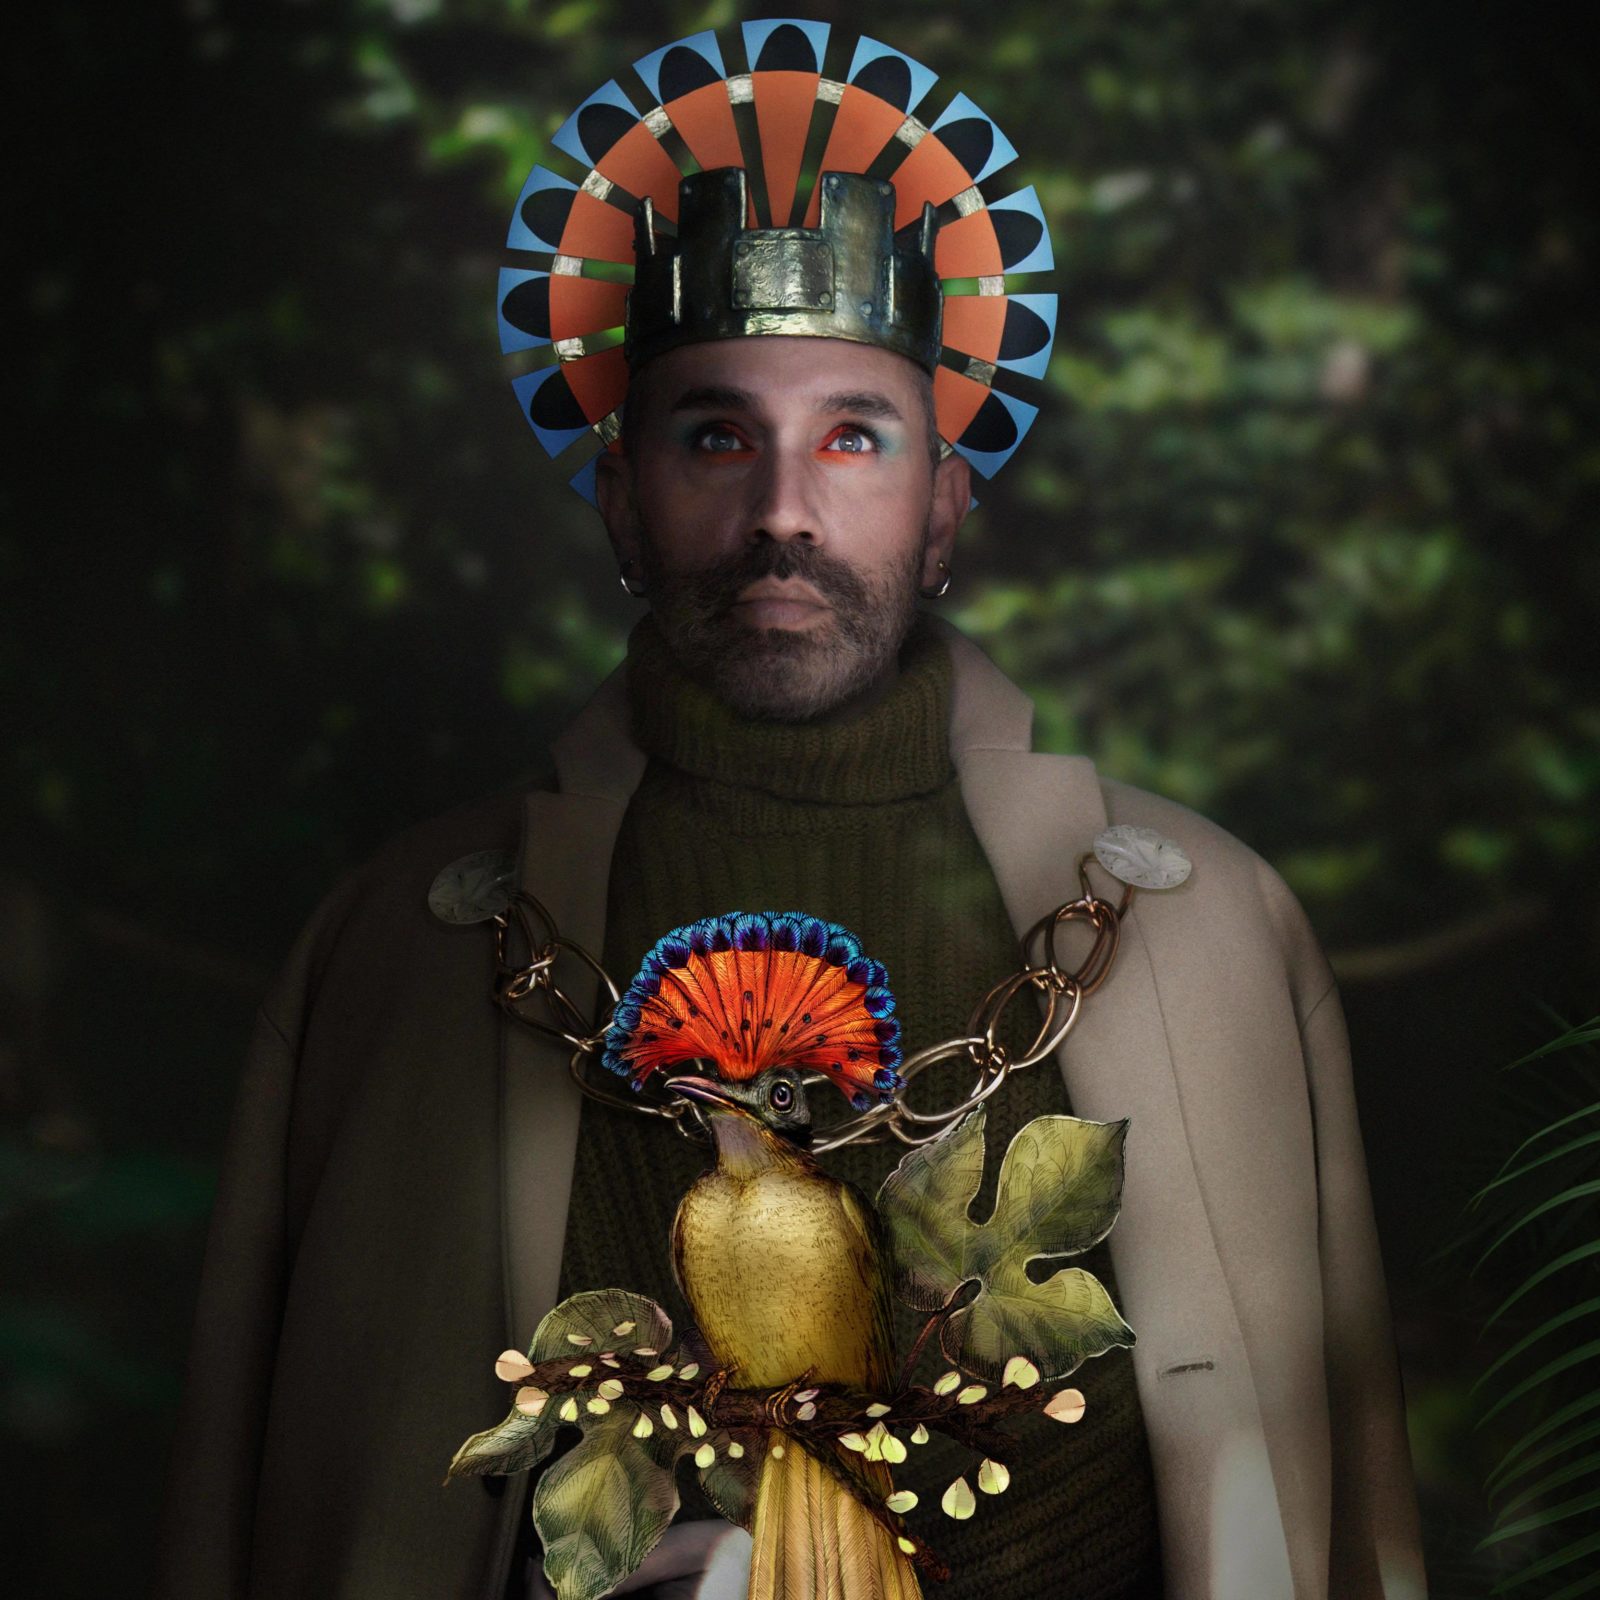 Paul Harfleet dressed as an Amazonian Royal Flycatcher, he is wearing a red and turquoise headdress, and red and turquoise eye shadow. In front of him is a detailed illustration of the bird.